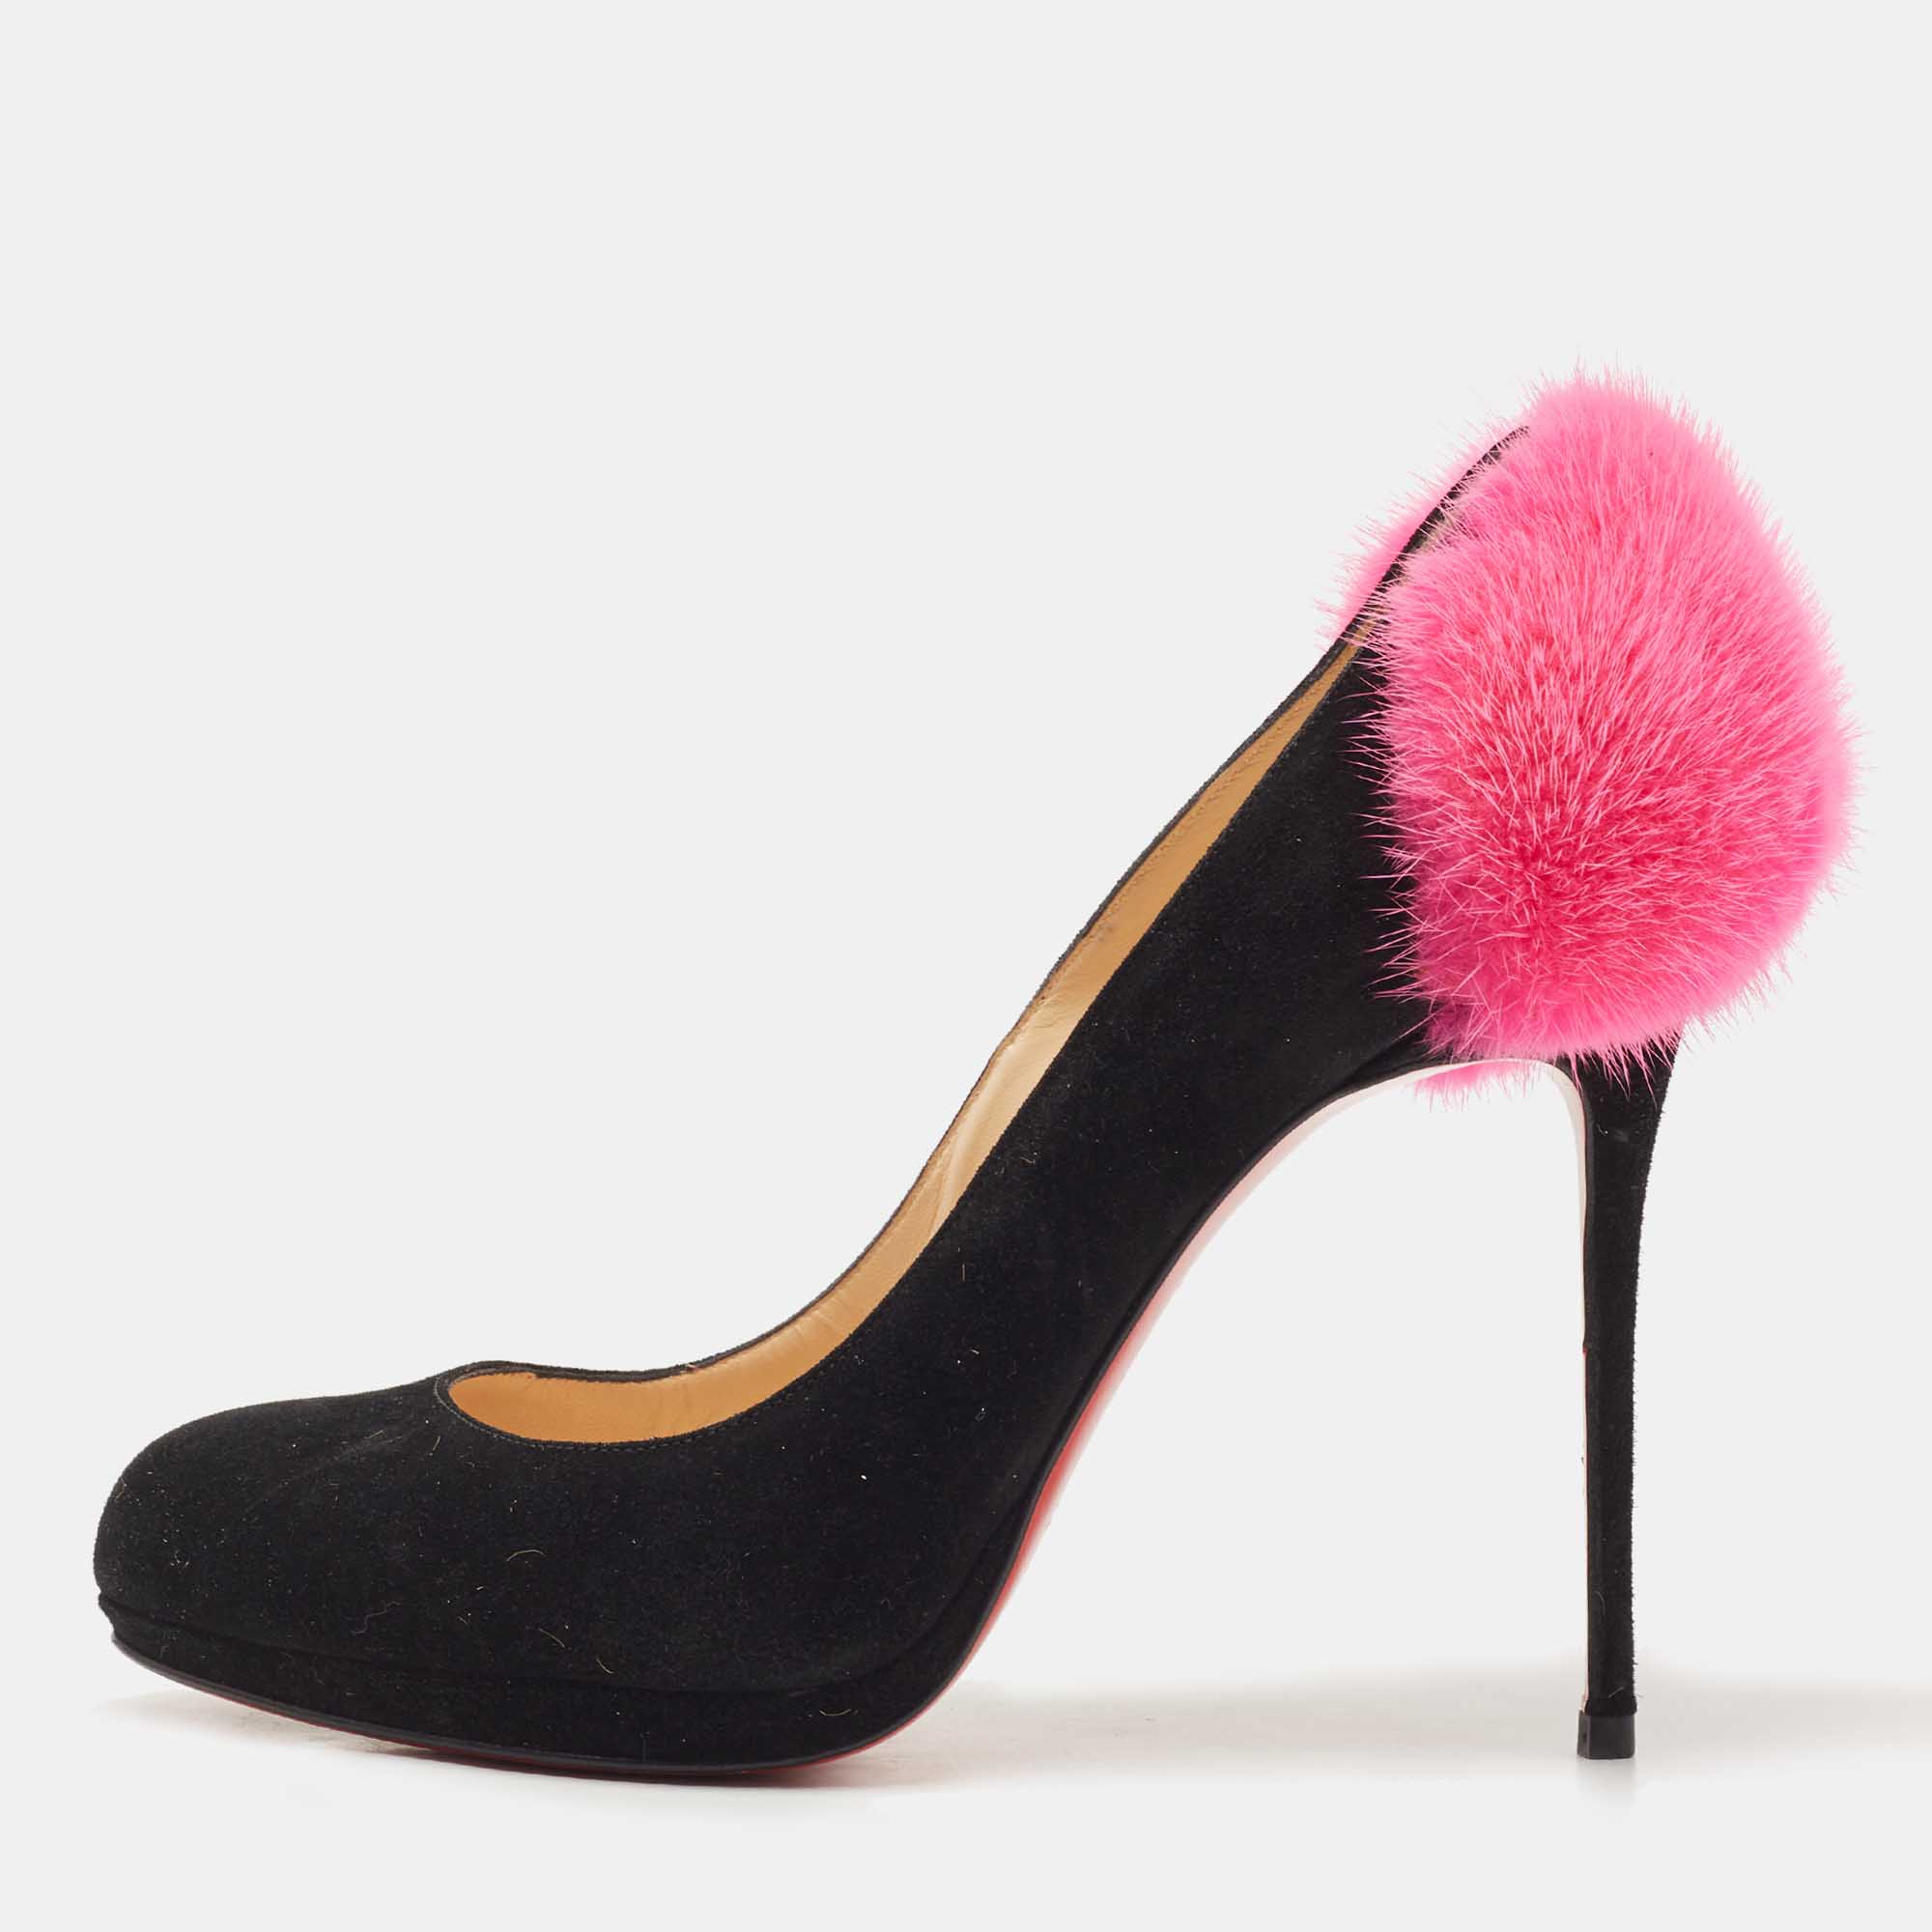 Christian louboutin black/pink suede and fur achilda pumps size 38